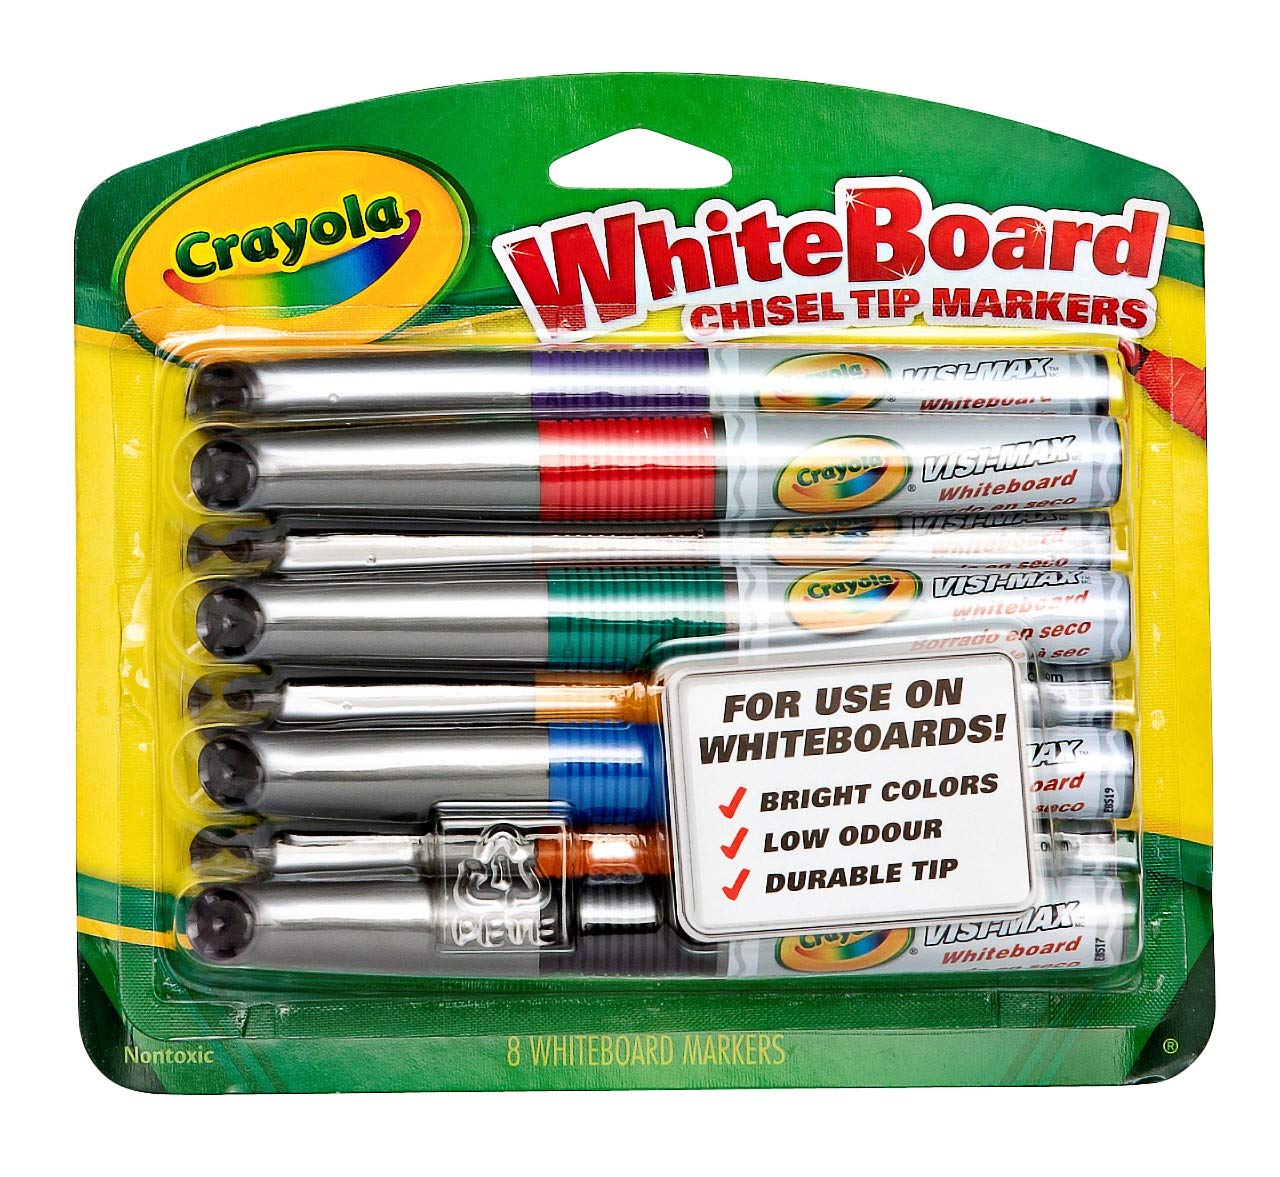 Crayola Dry Erase Markers, Chisel Tip, Low Odor, 8 Count